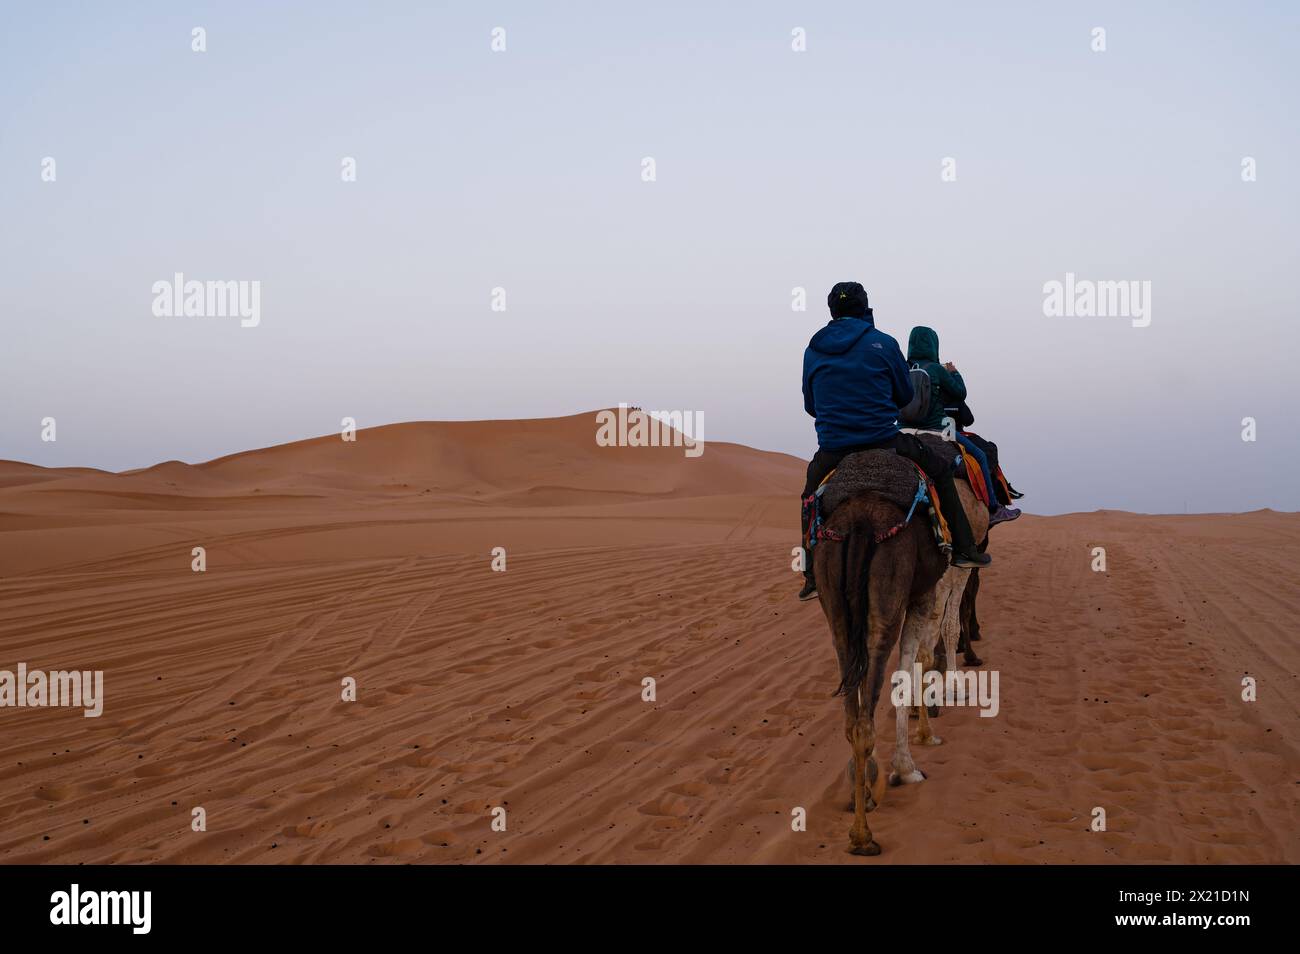 Dawn camel ride in the Merzouga desert, the silhouette of a middle-aged man and a young woman emerges, mounted on dromedaries. they follow a trail. Stock Photo